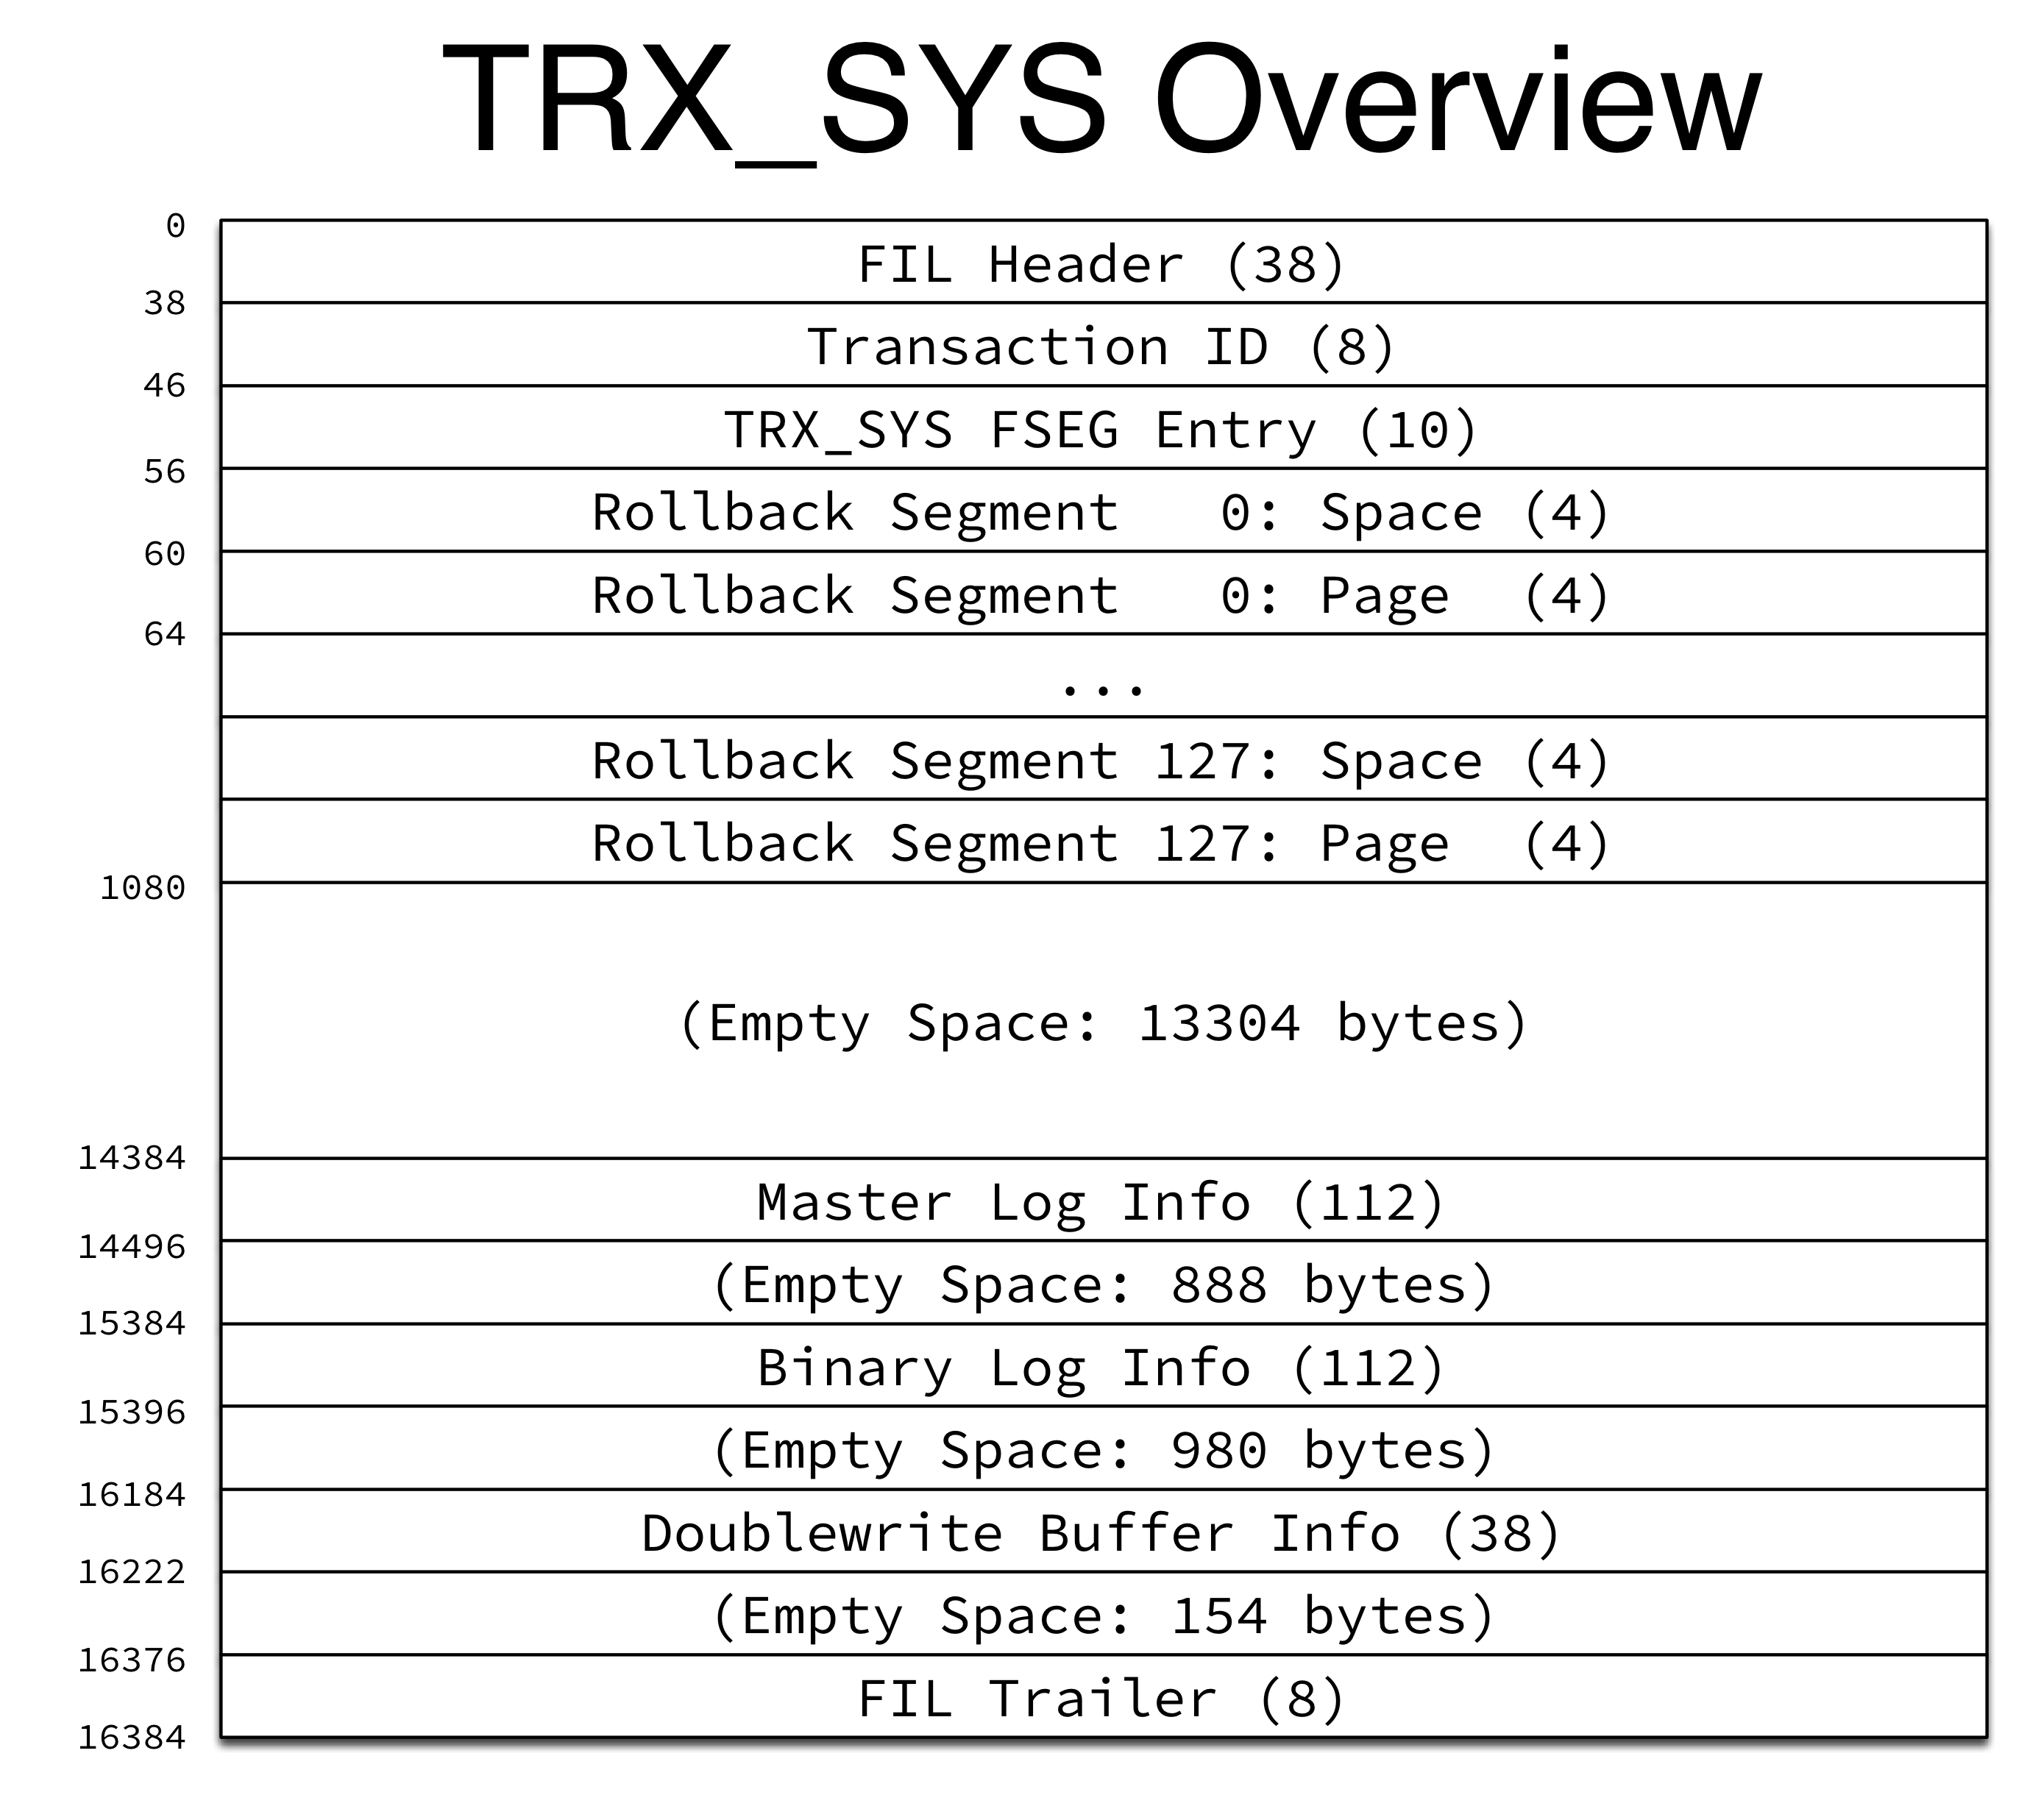 TRX_SYS Overview